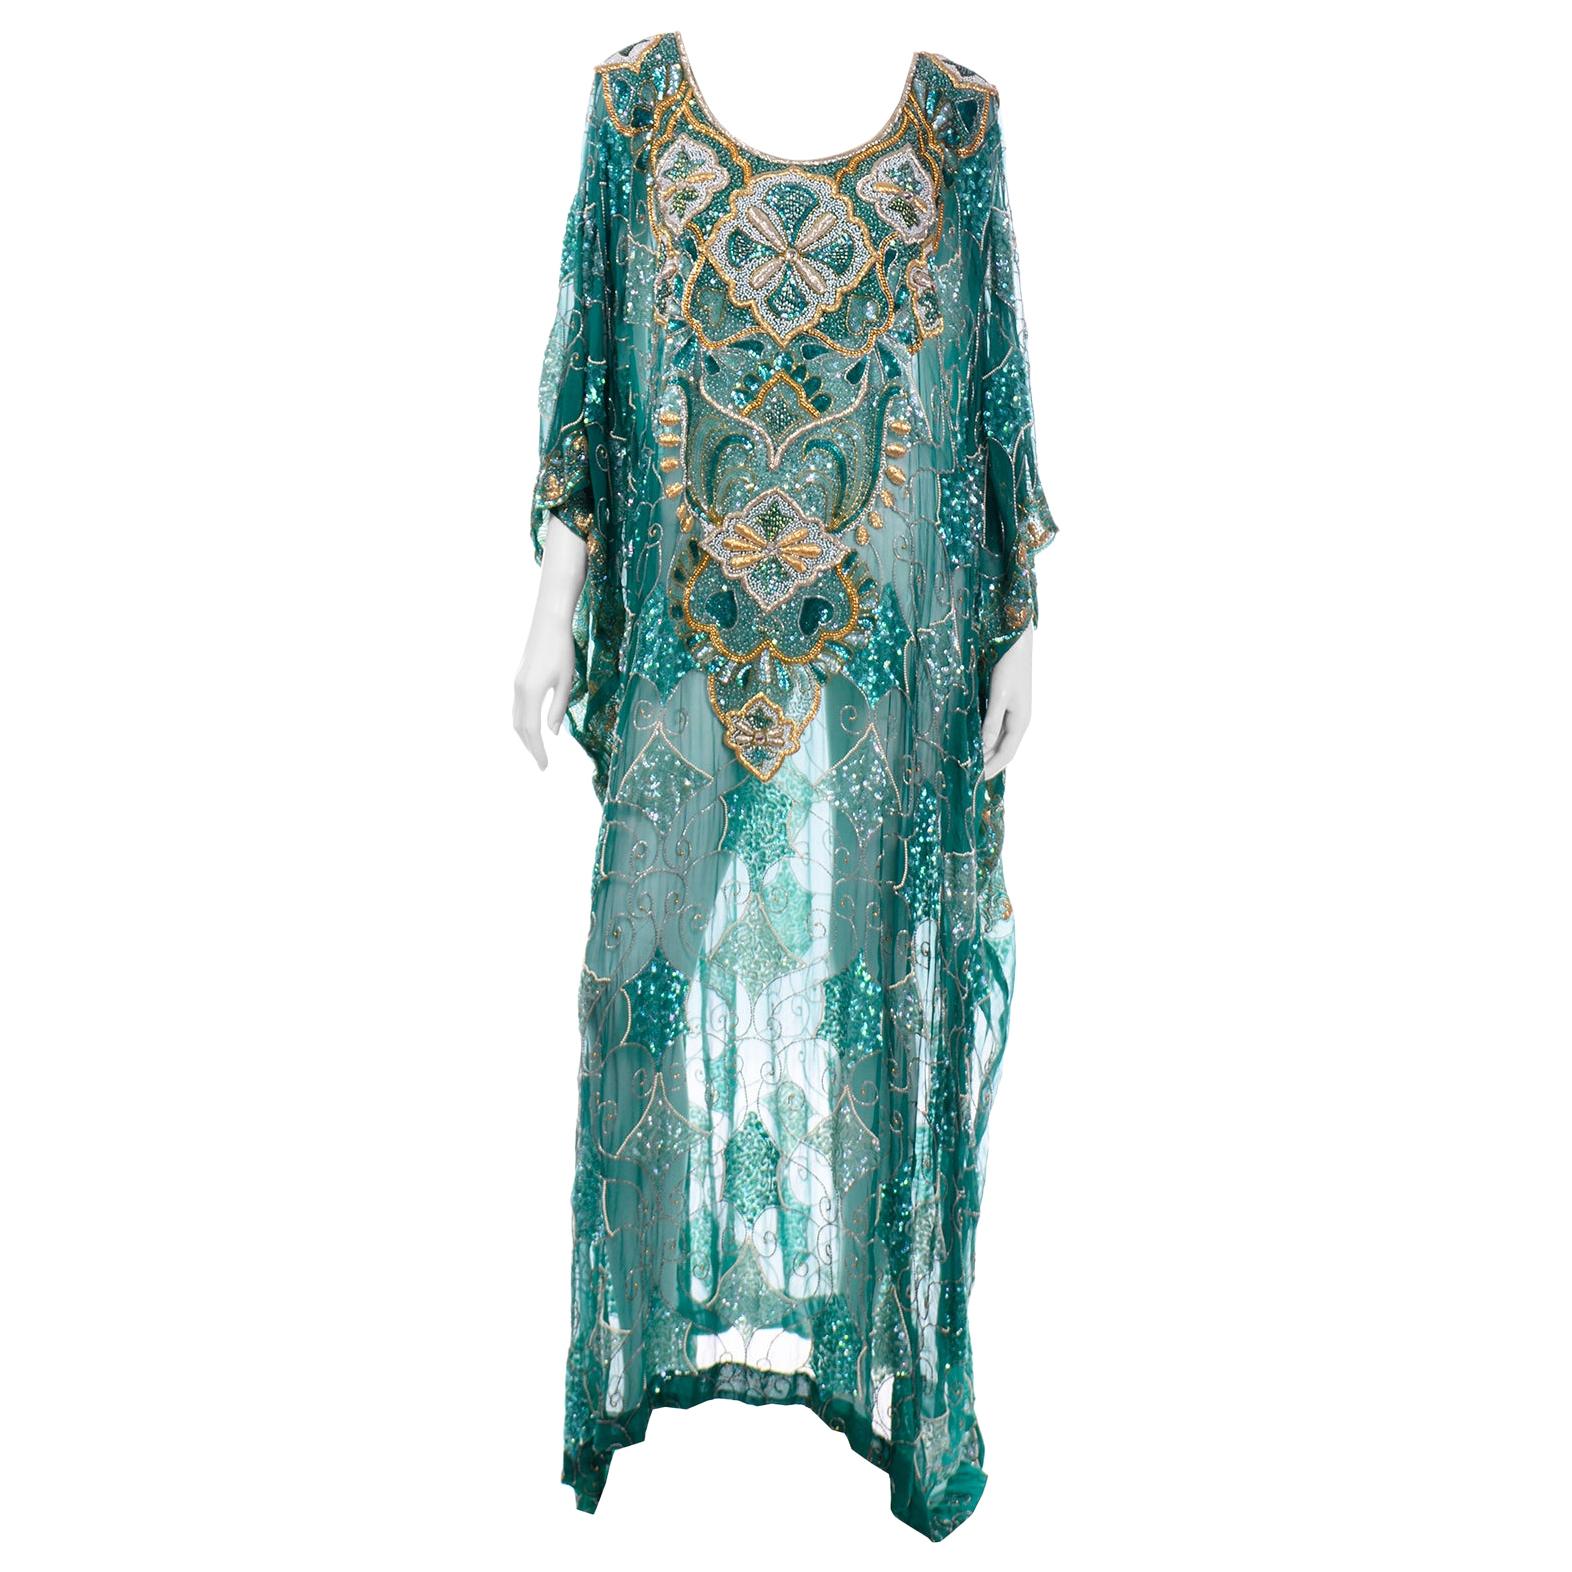 Green Beaded Silk Vintage Caftan with Gold Metallic Embroidery and Sequins